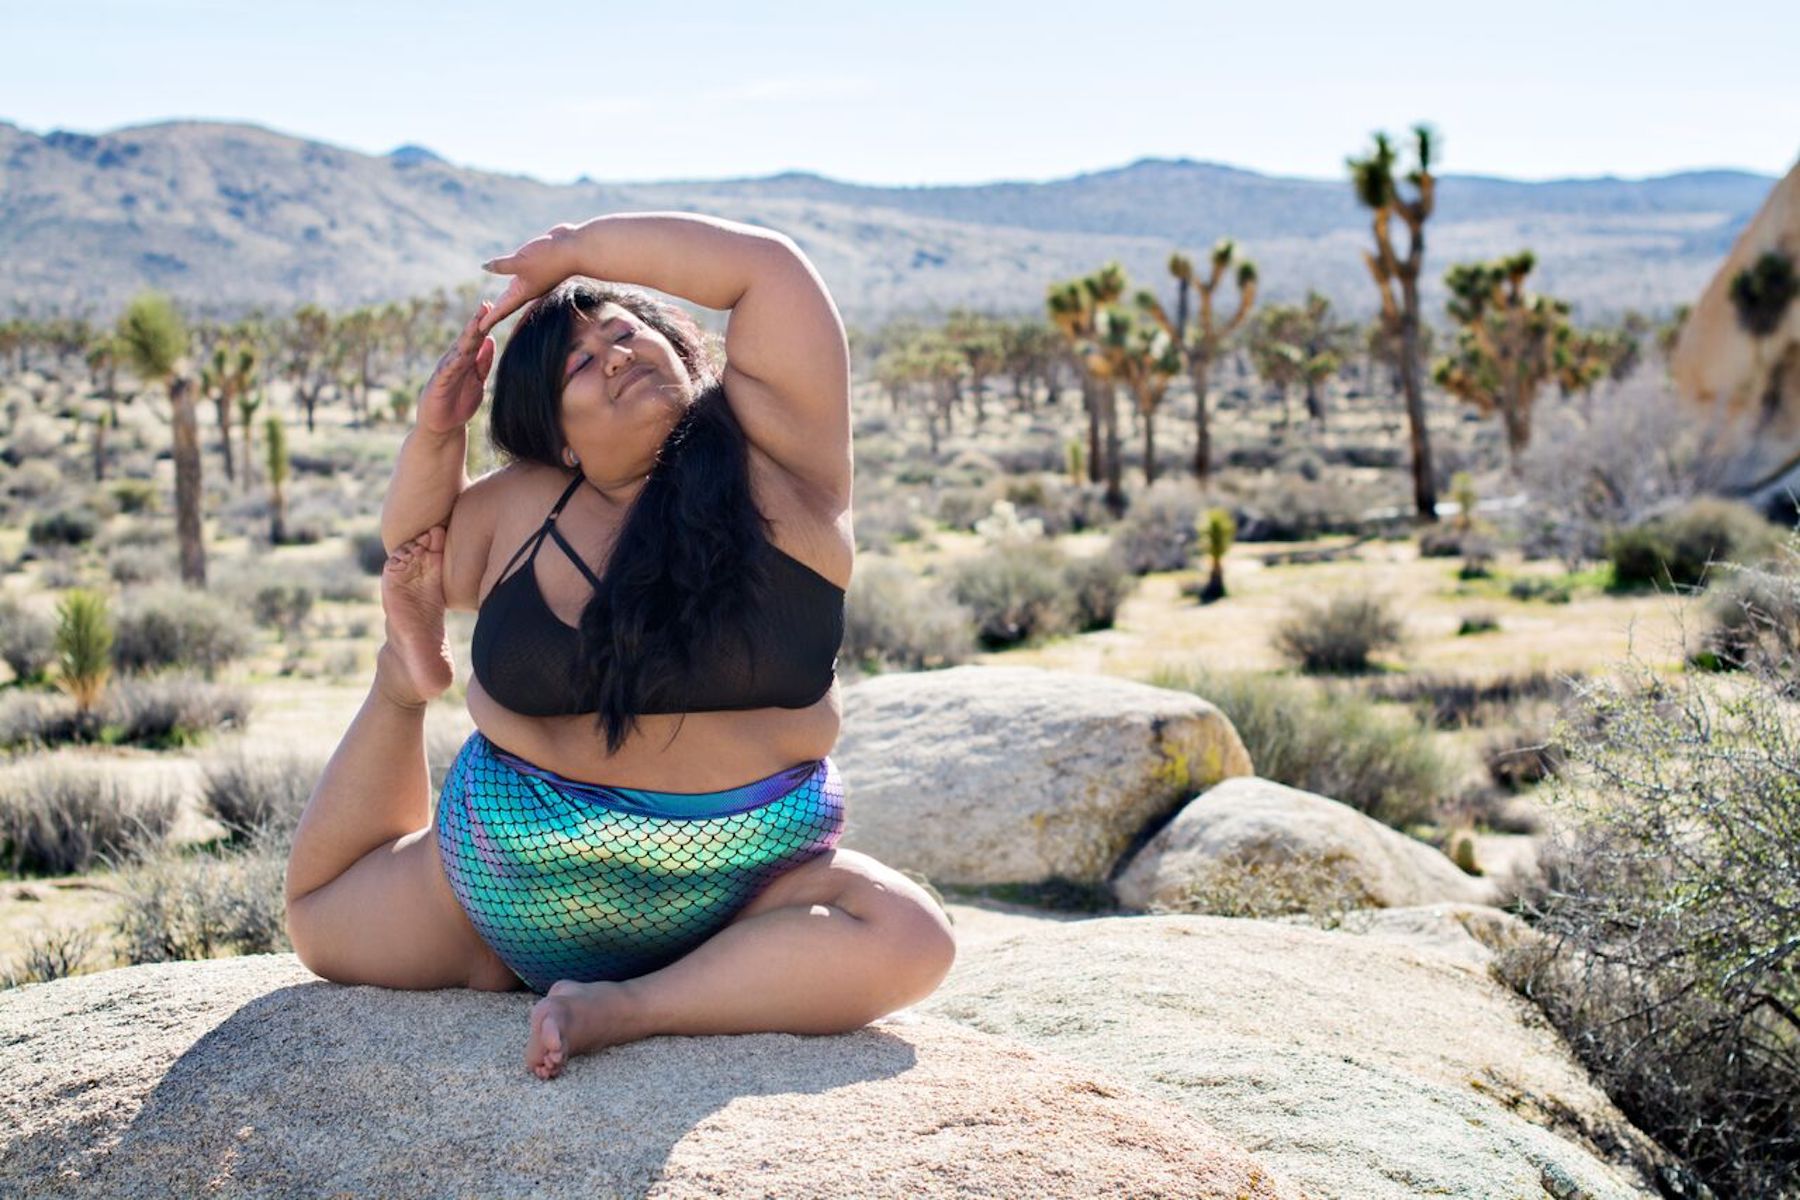 Plus size Yoga Instructor shows off her curves as she shares her